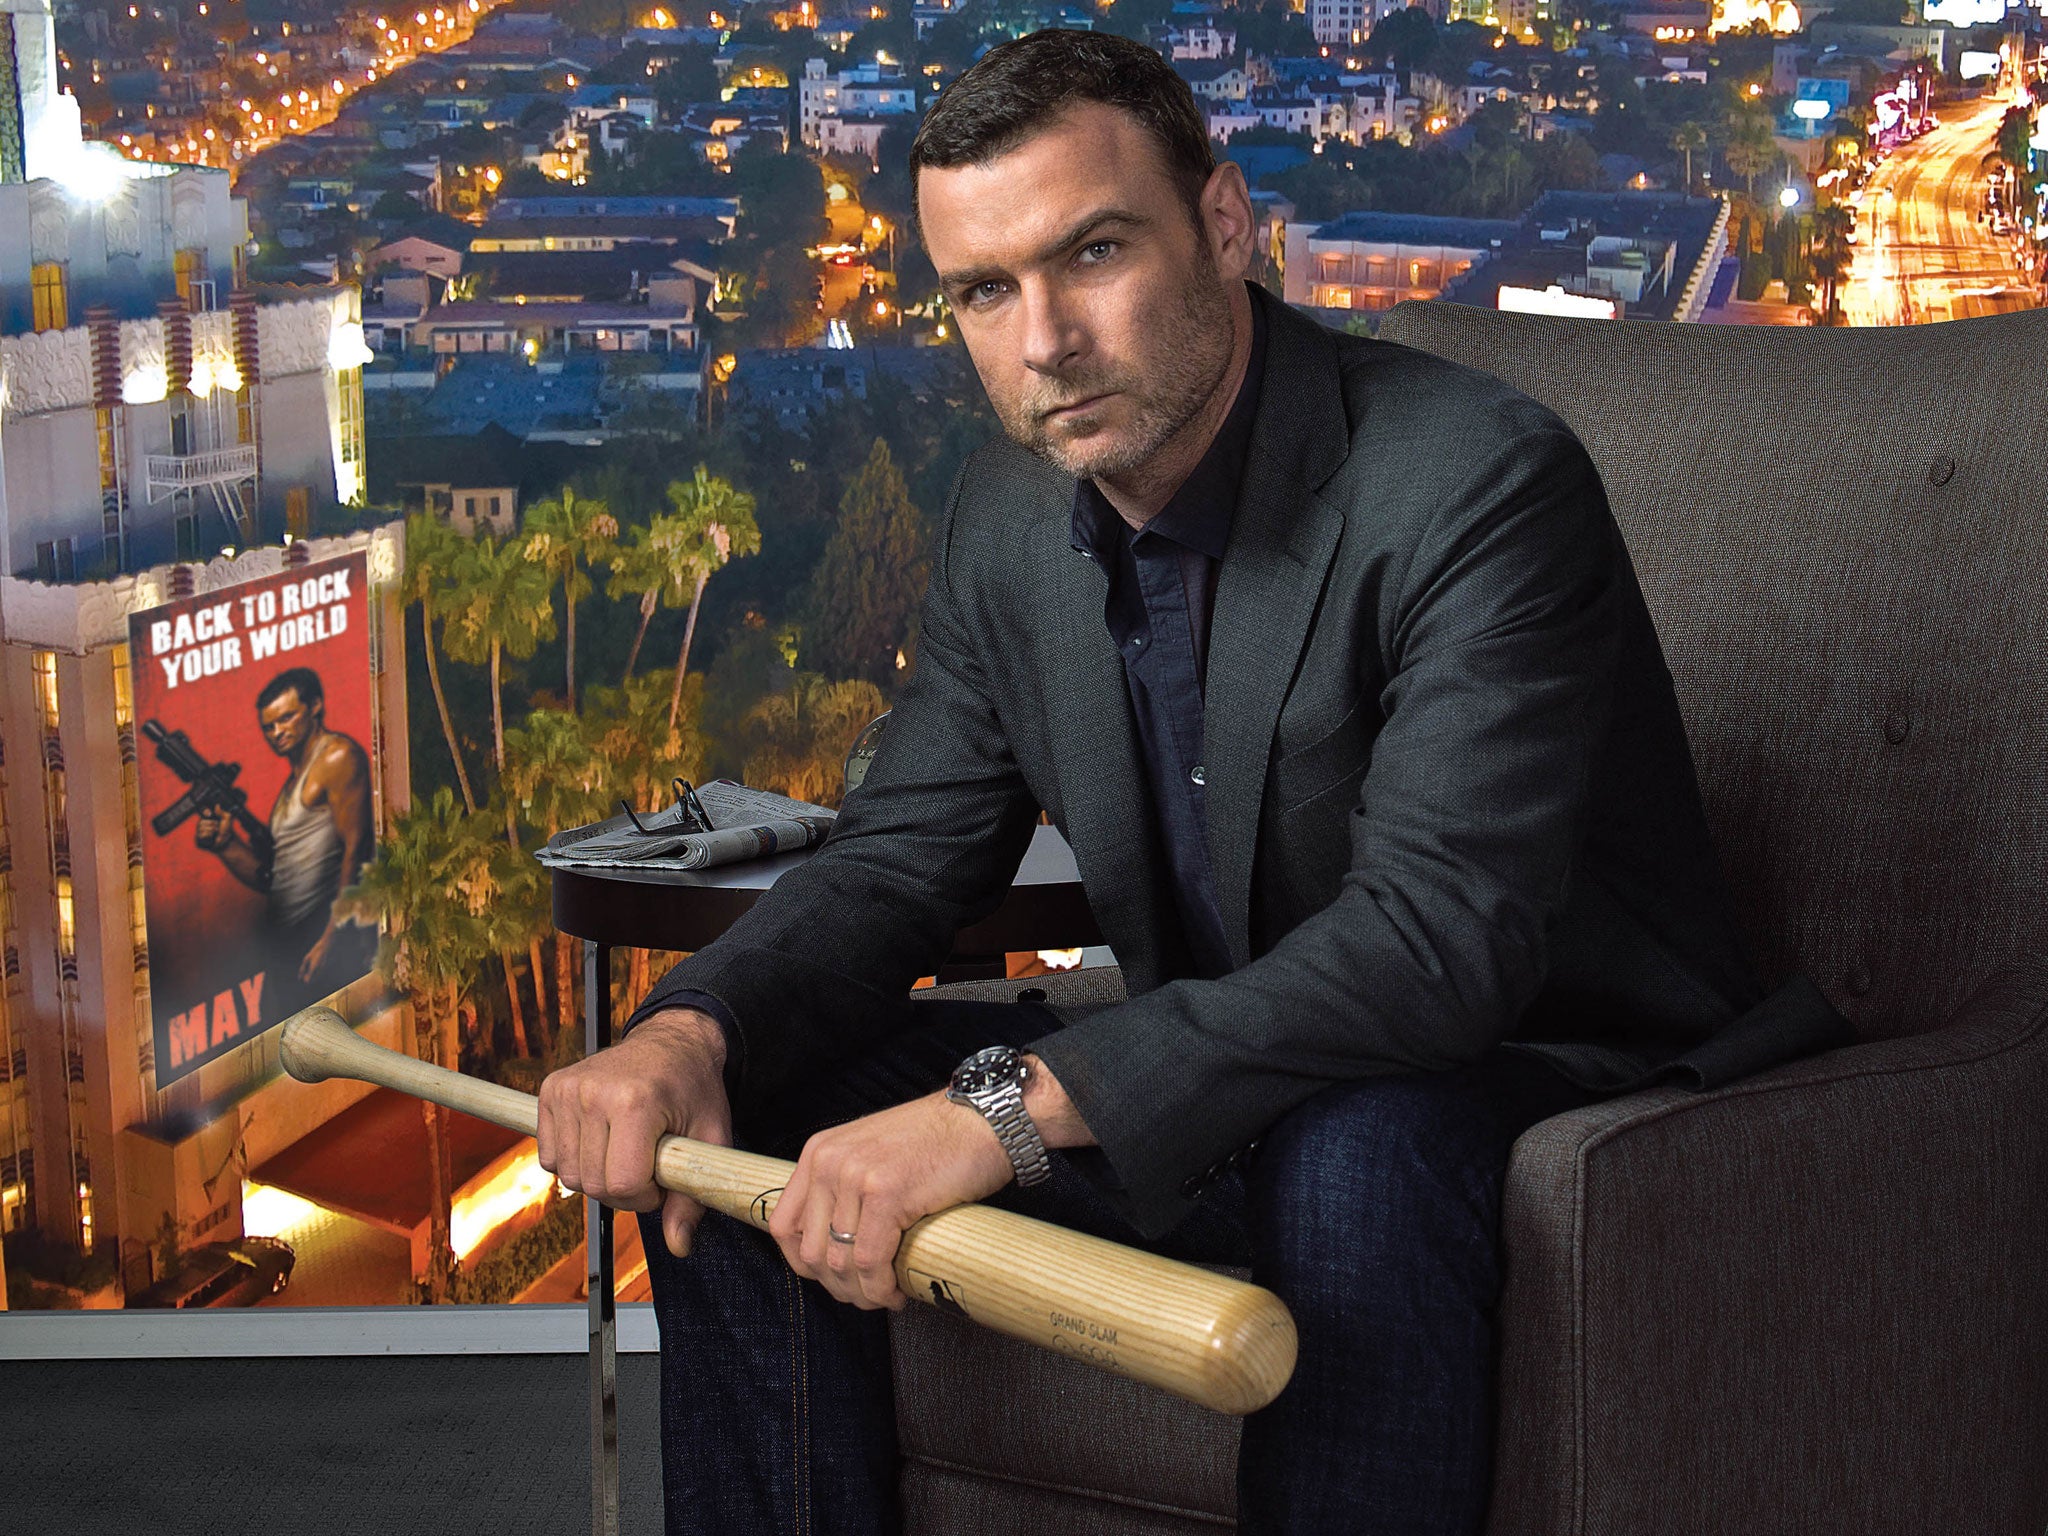 Liev Schreiber as Ray Donovan, who was a 'fixer' in Hollywood